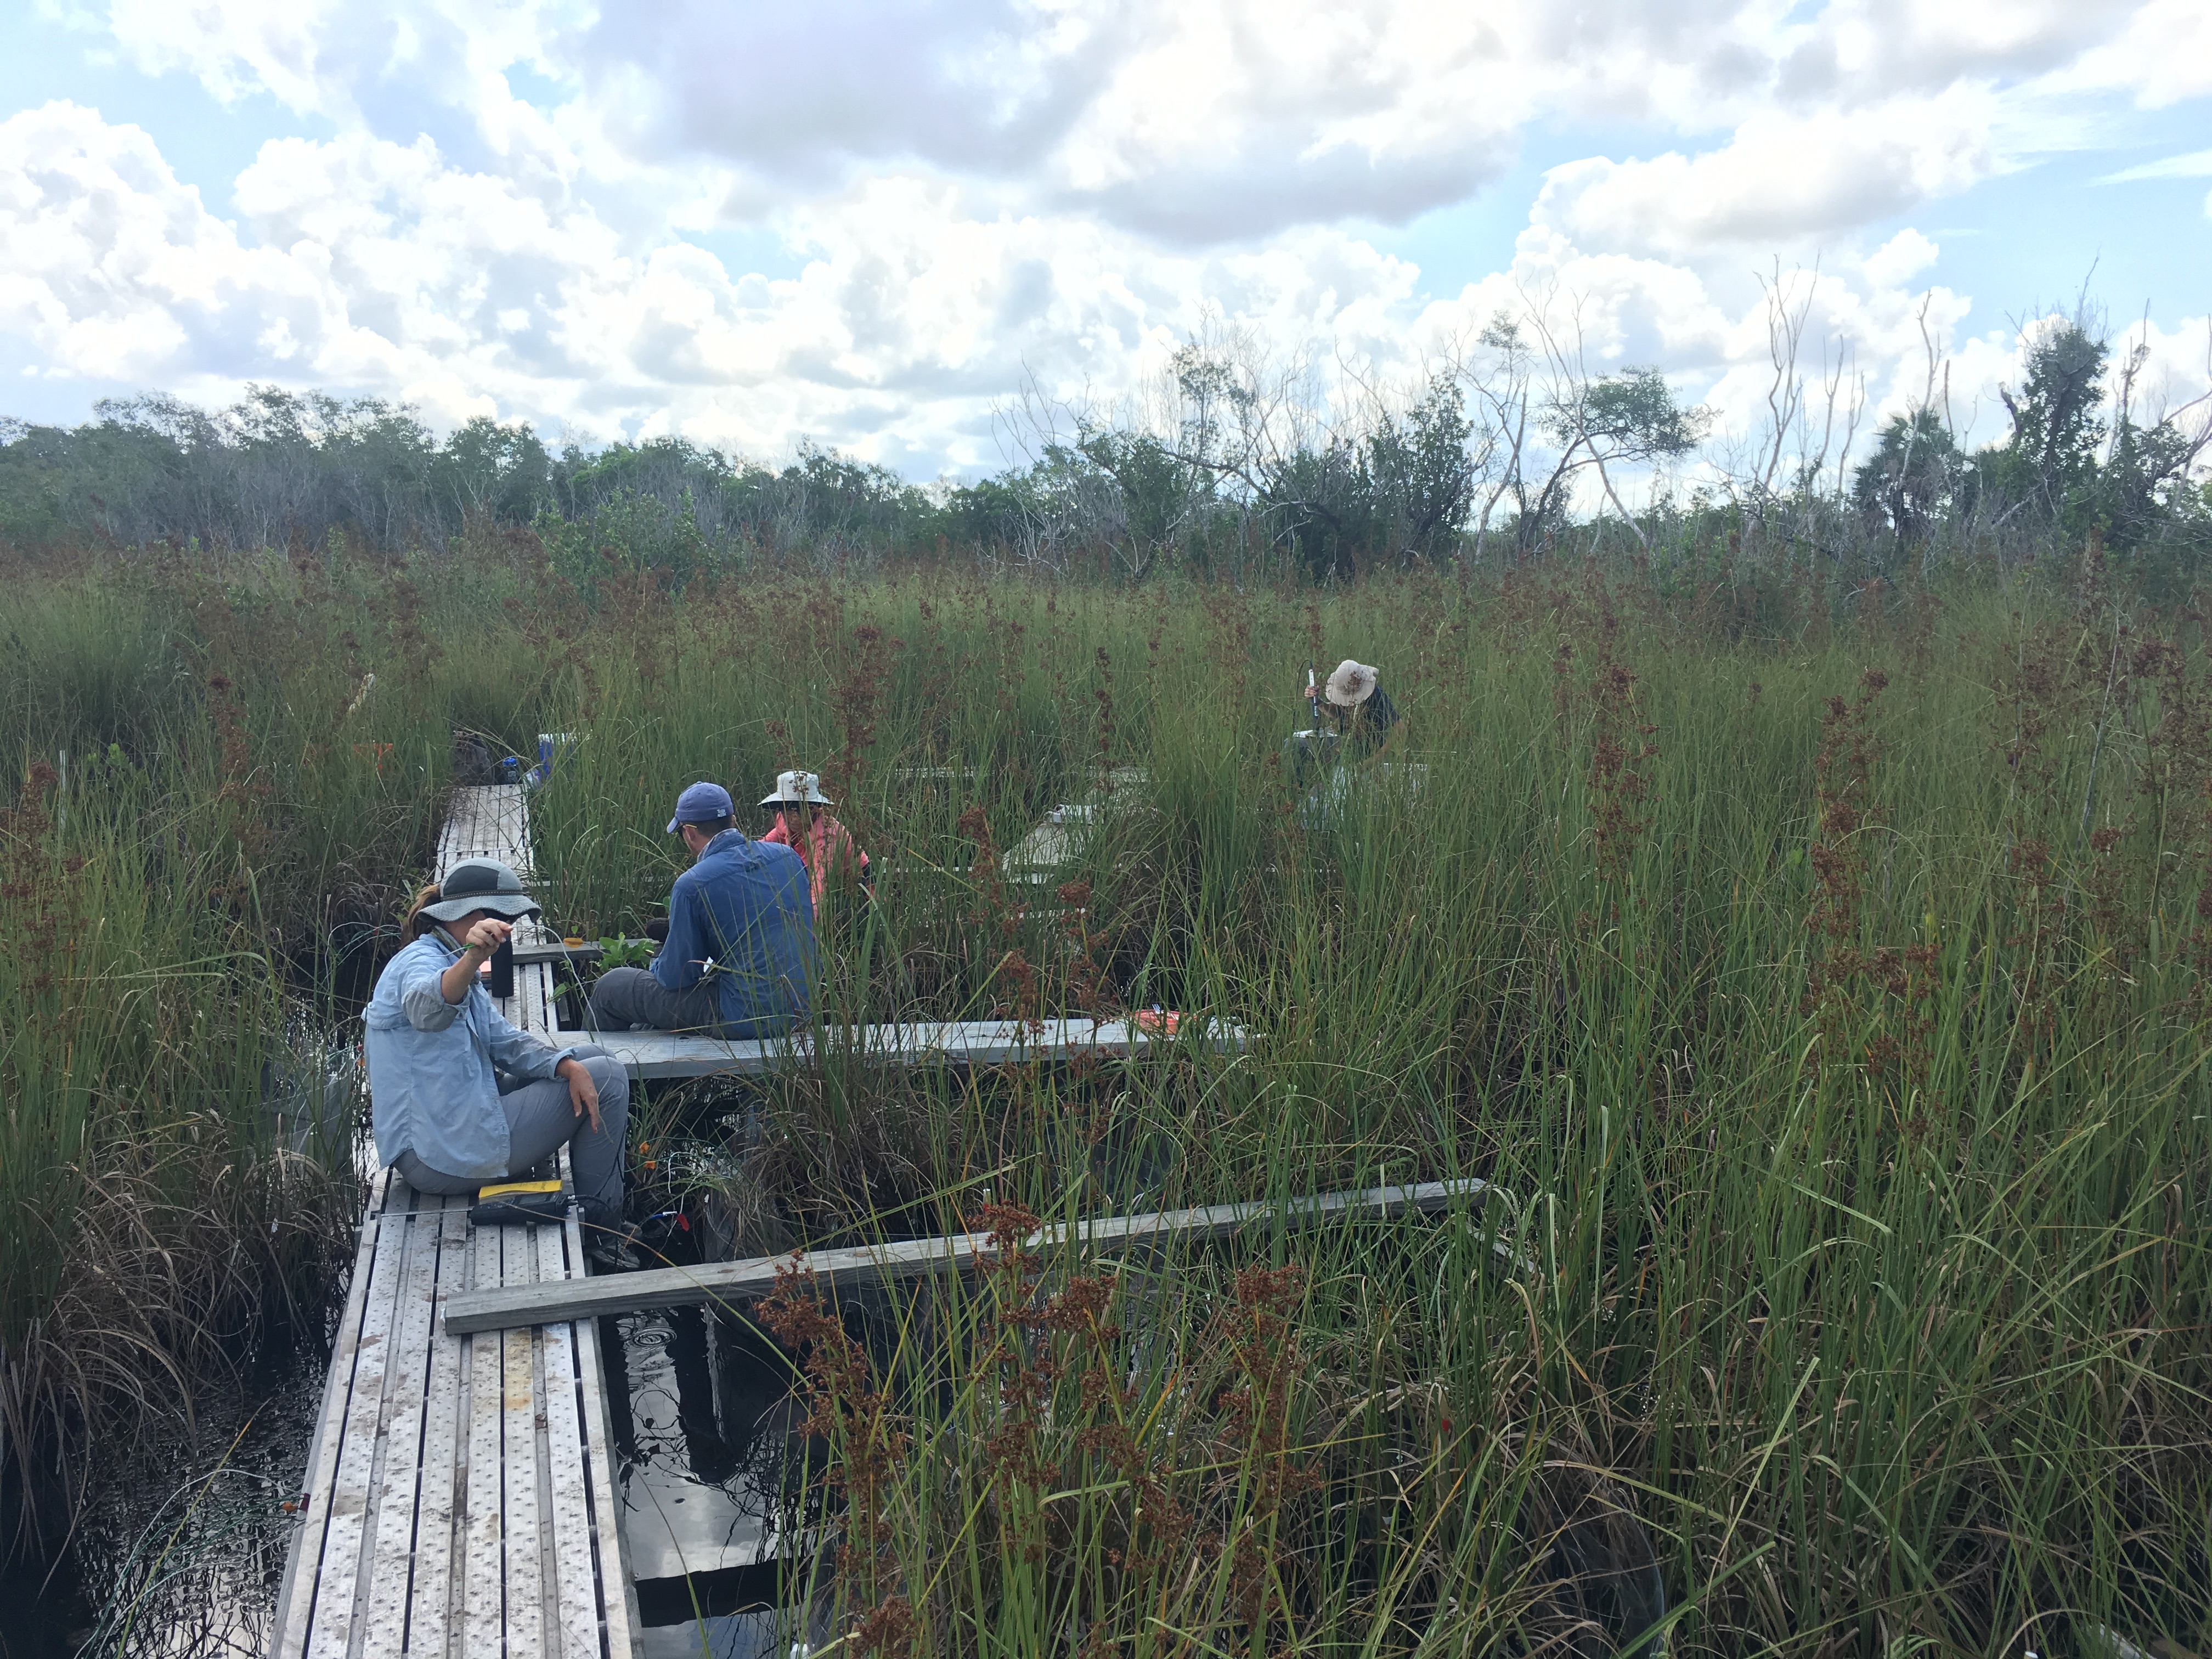 FCE researchers collecting a suite of measurements at a brackish water site